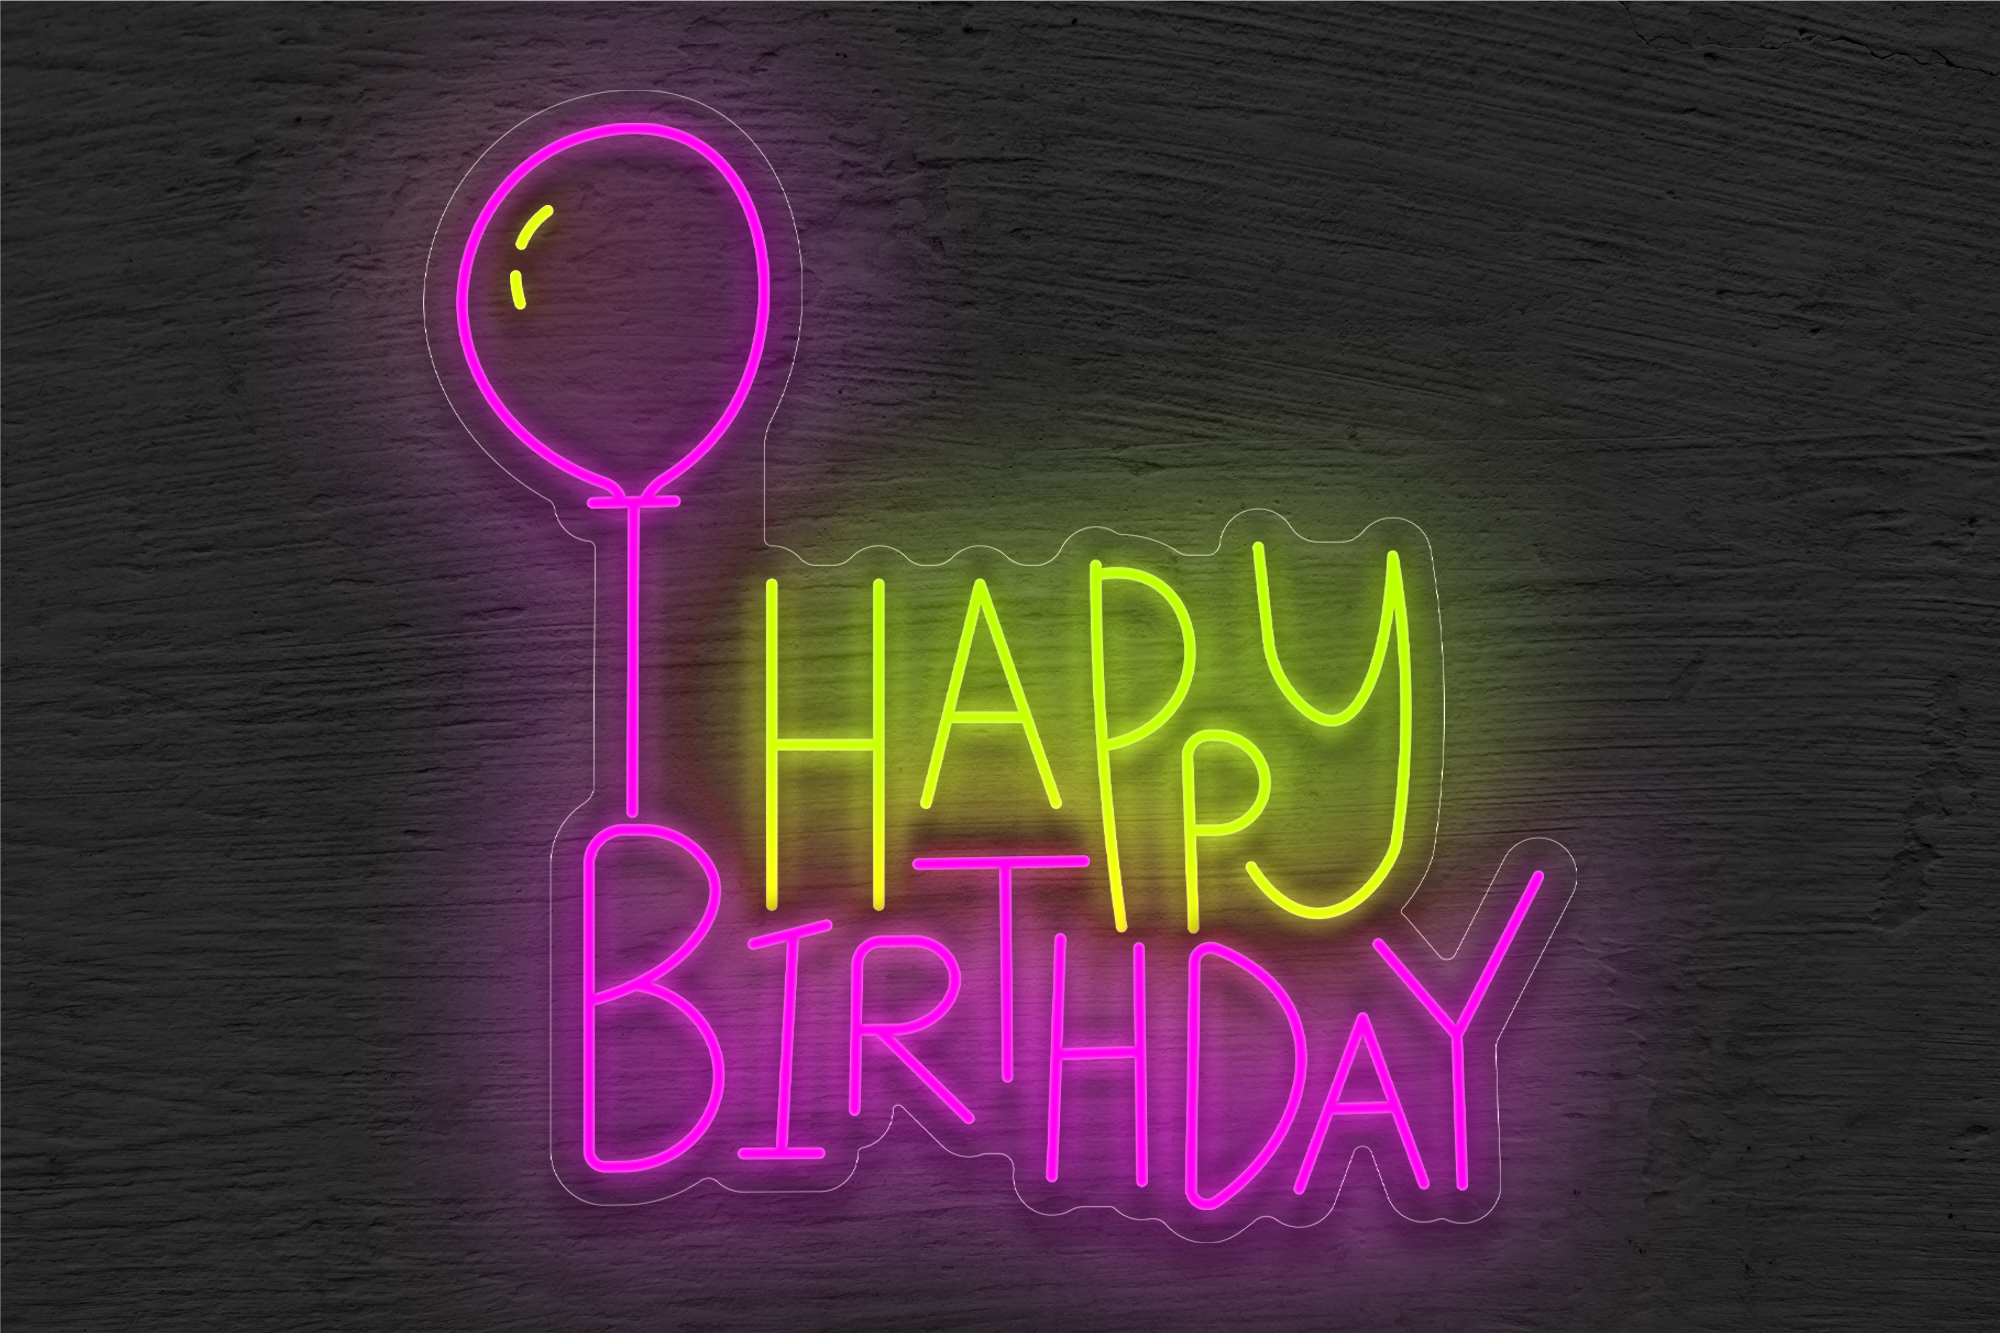 "Happy Birthday" with Balloon LED Neon Sign